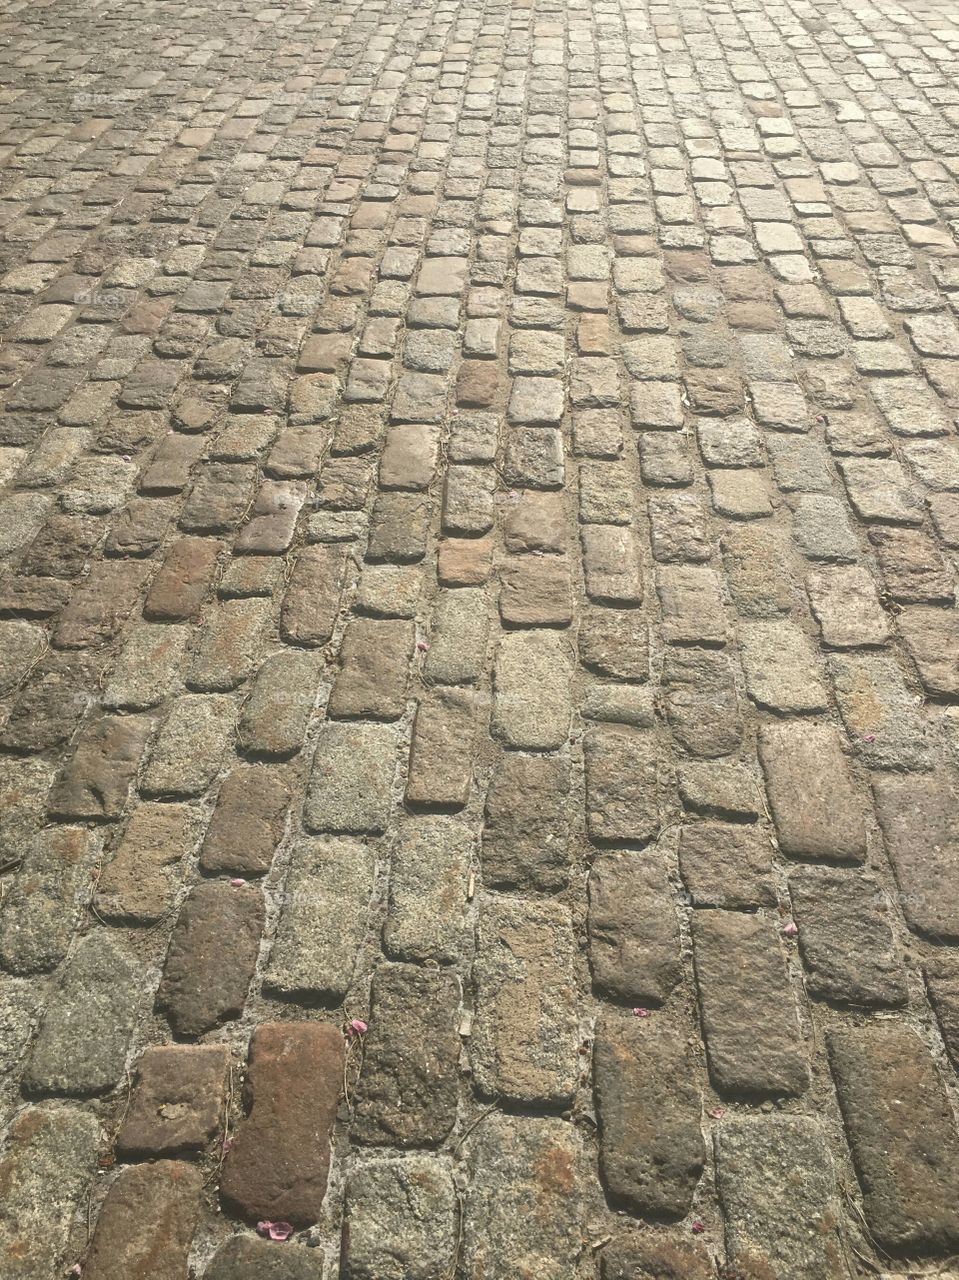 Cobbled Streets